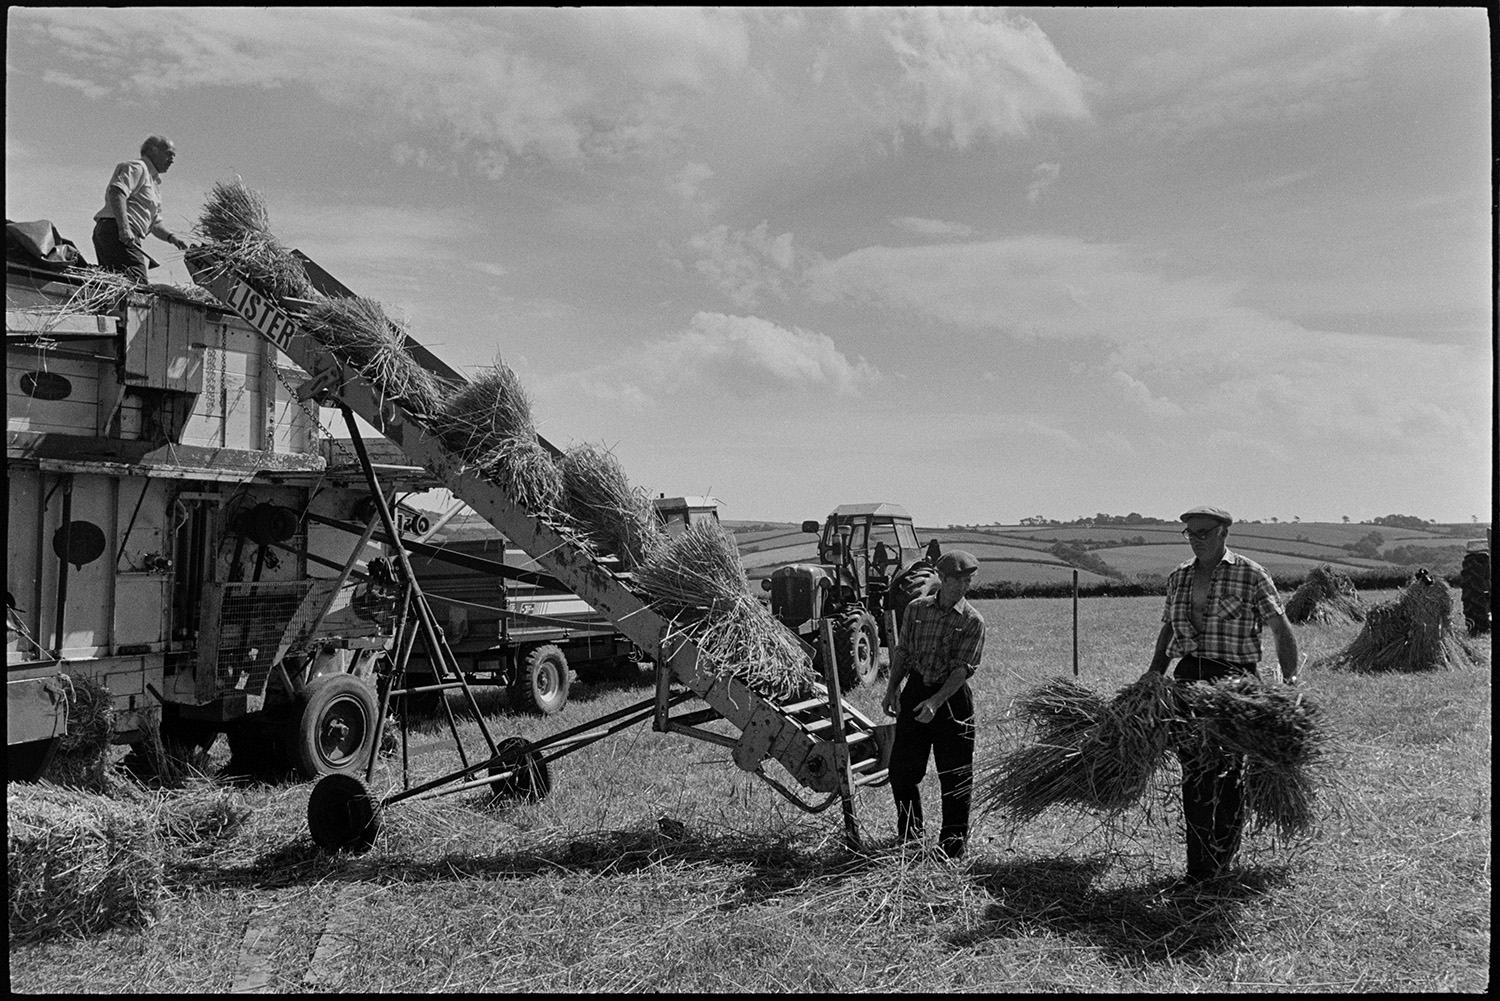 Reed combing in harvest field men carrying nitches of wheat to reedcomber.
[Men, possibly from the Down family, working with a reed comber in a field at Spittle, Chulmleigh. One man is passing bundles of wheat to another man who is lifting them onto the elevator to be processed by the reed comber.]